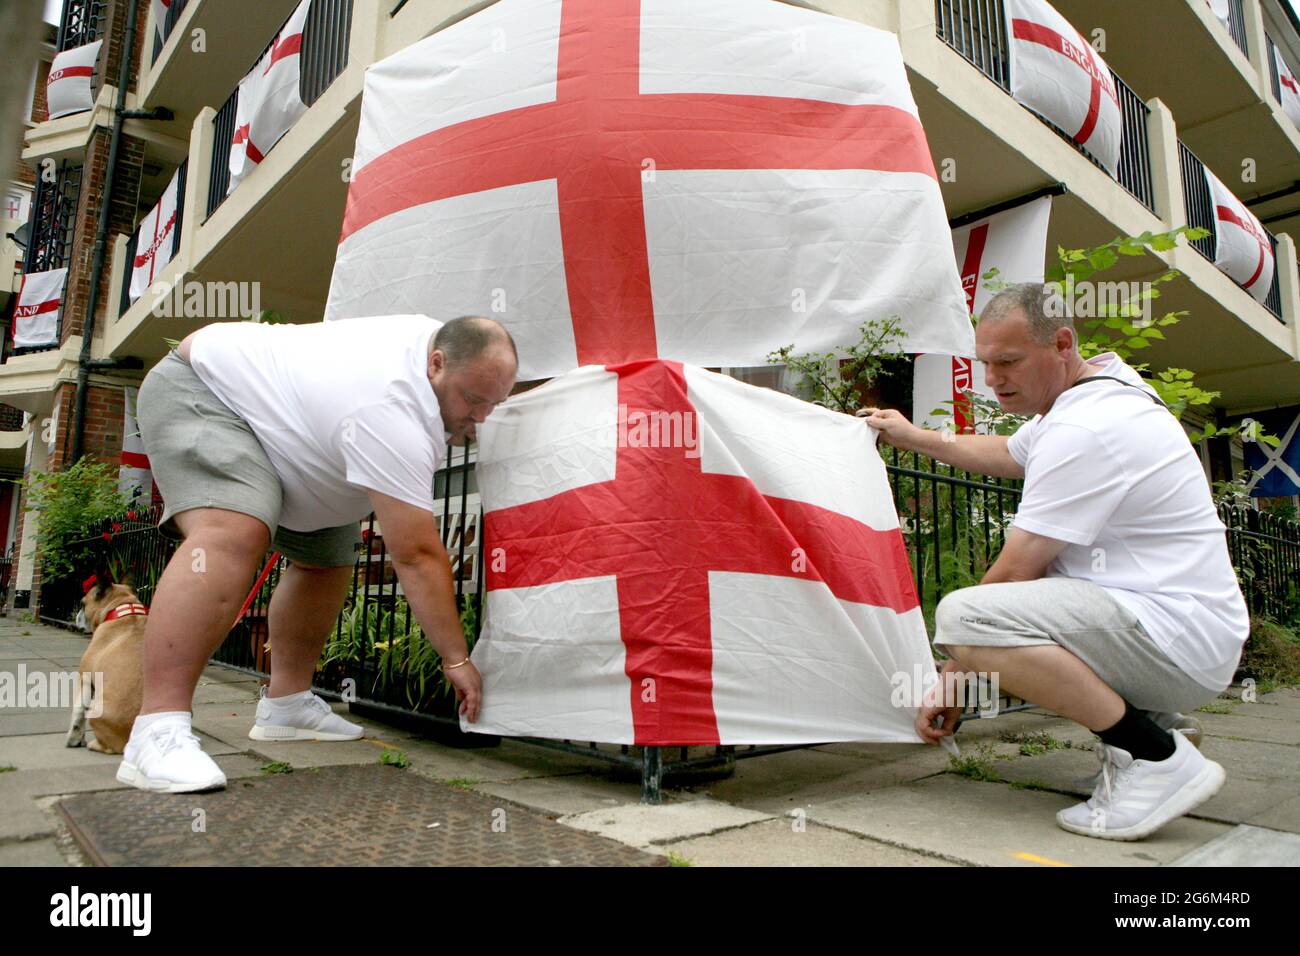 Chris Dowse (left) and Alan Putman, secure a flag on the Kirby Estate in Bermondsey, south London, where residents are showing their support for England ahead of their game against Denmark at Wembley on Wednesday evening in the second semi-final of Euro 2020. Picture date: Wednesday July 7, 2021. Stock Photo